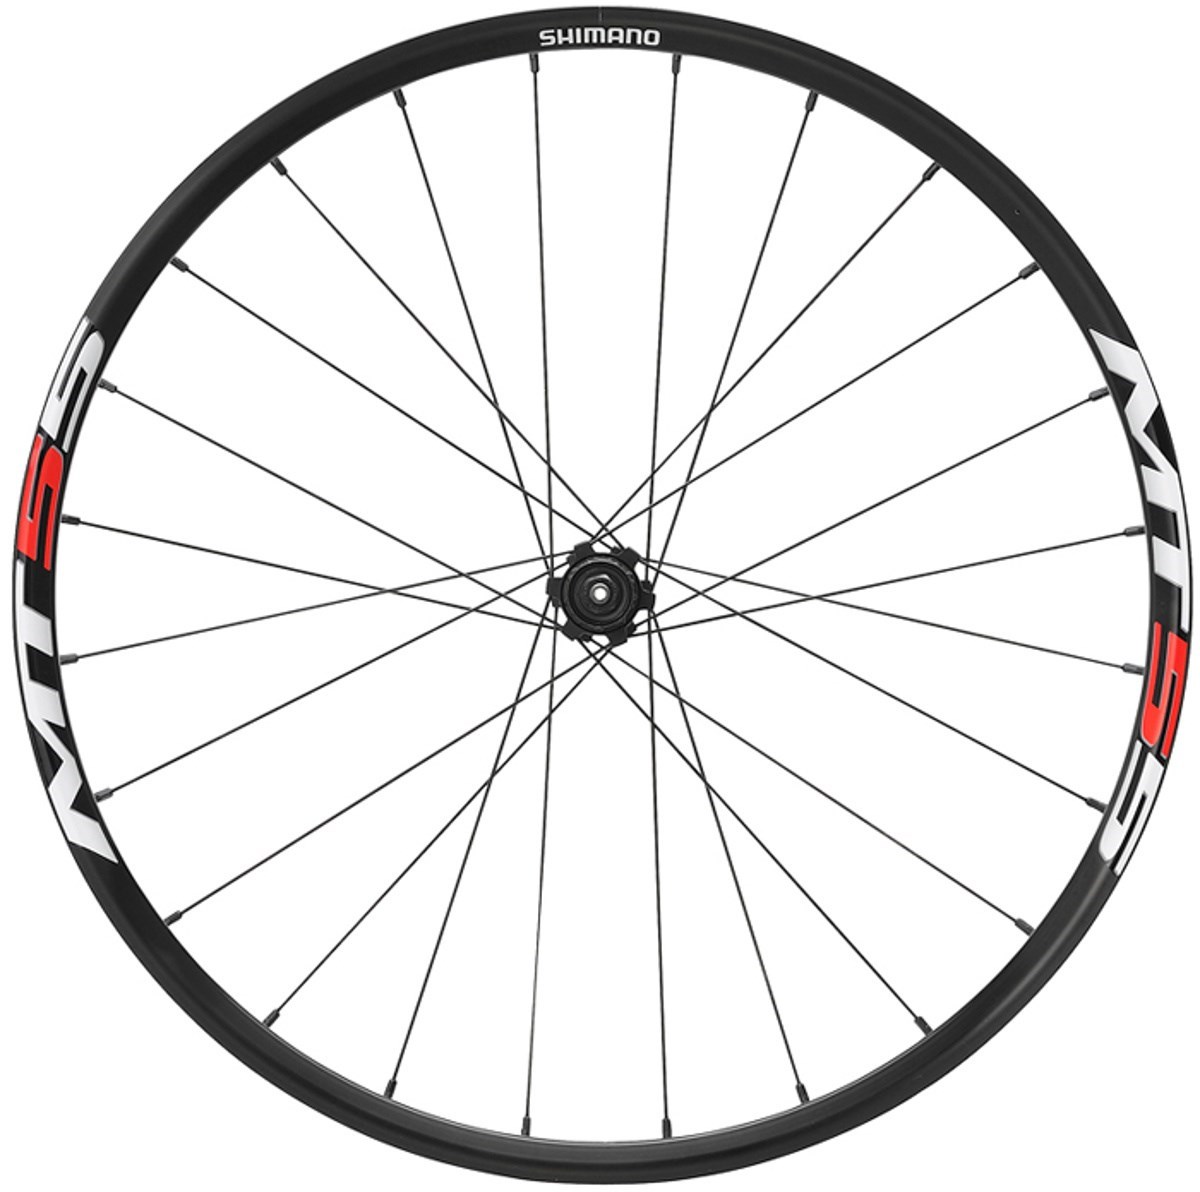 Shimano WH-MT55 29er Centre Lock Disc Specific Rear MTB Wheel product image